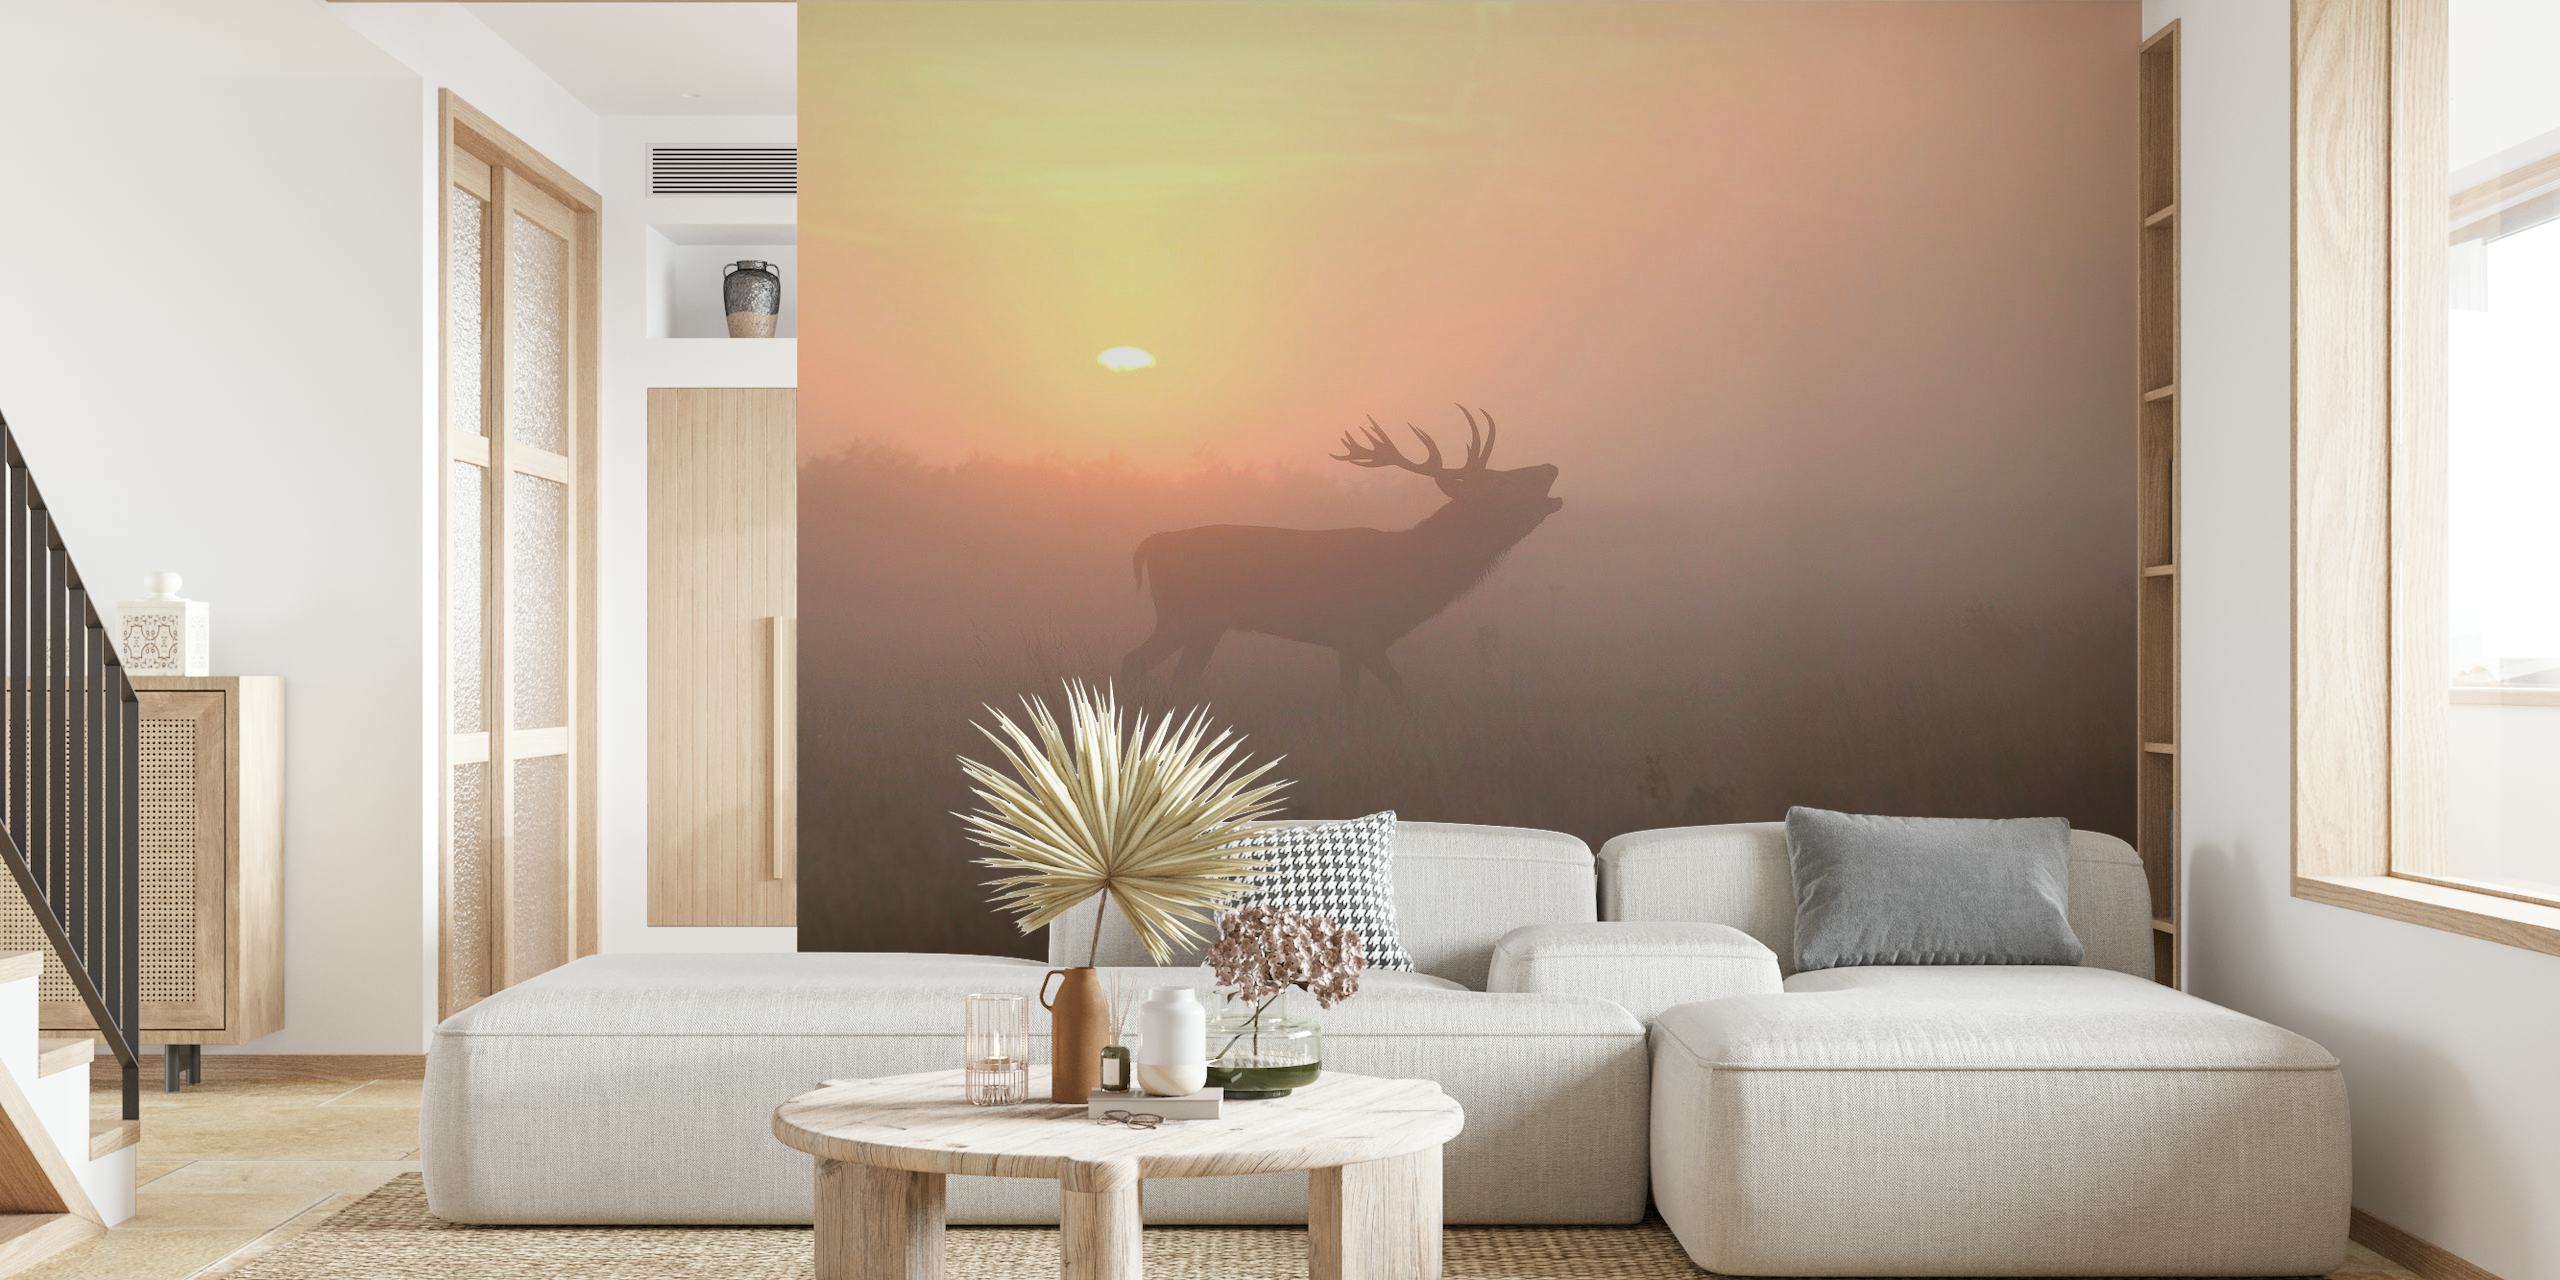 Misty Morning Stag papel pintado